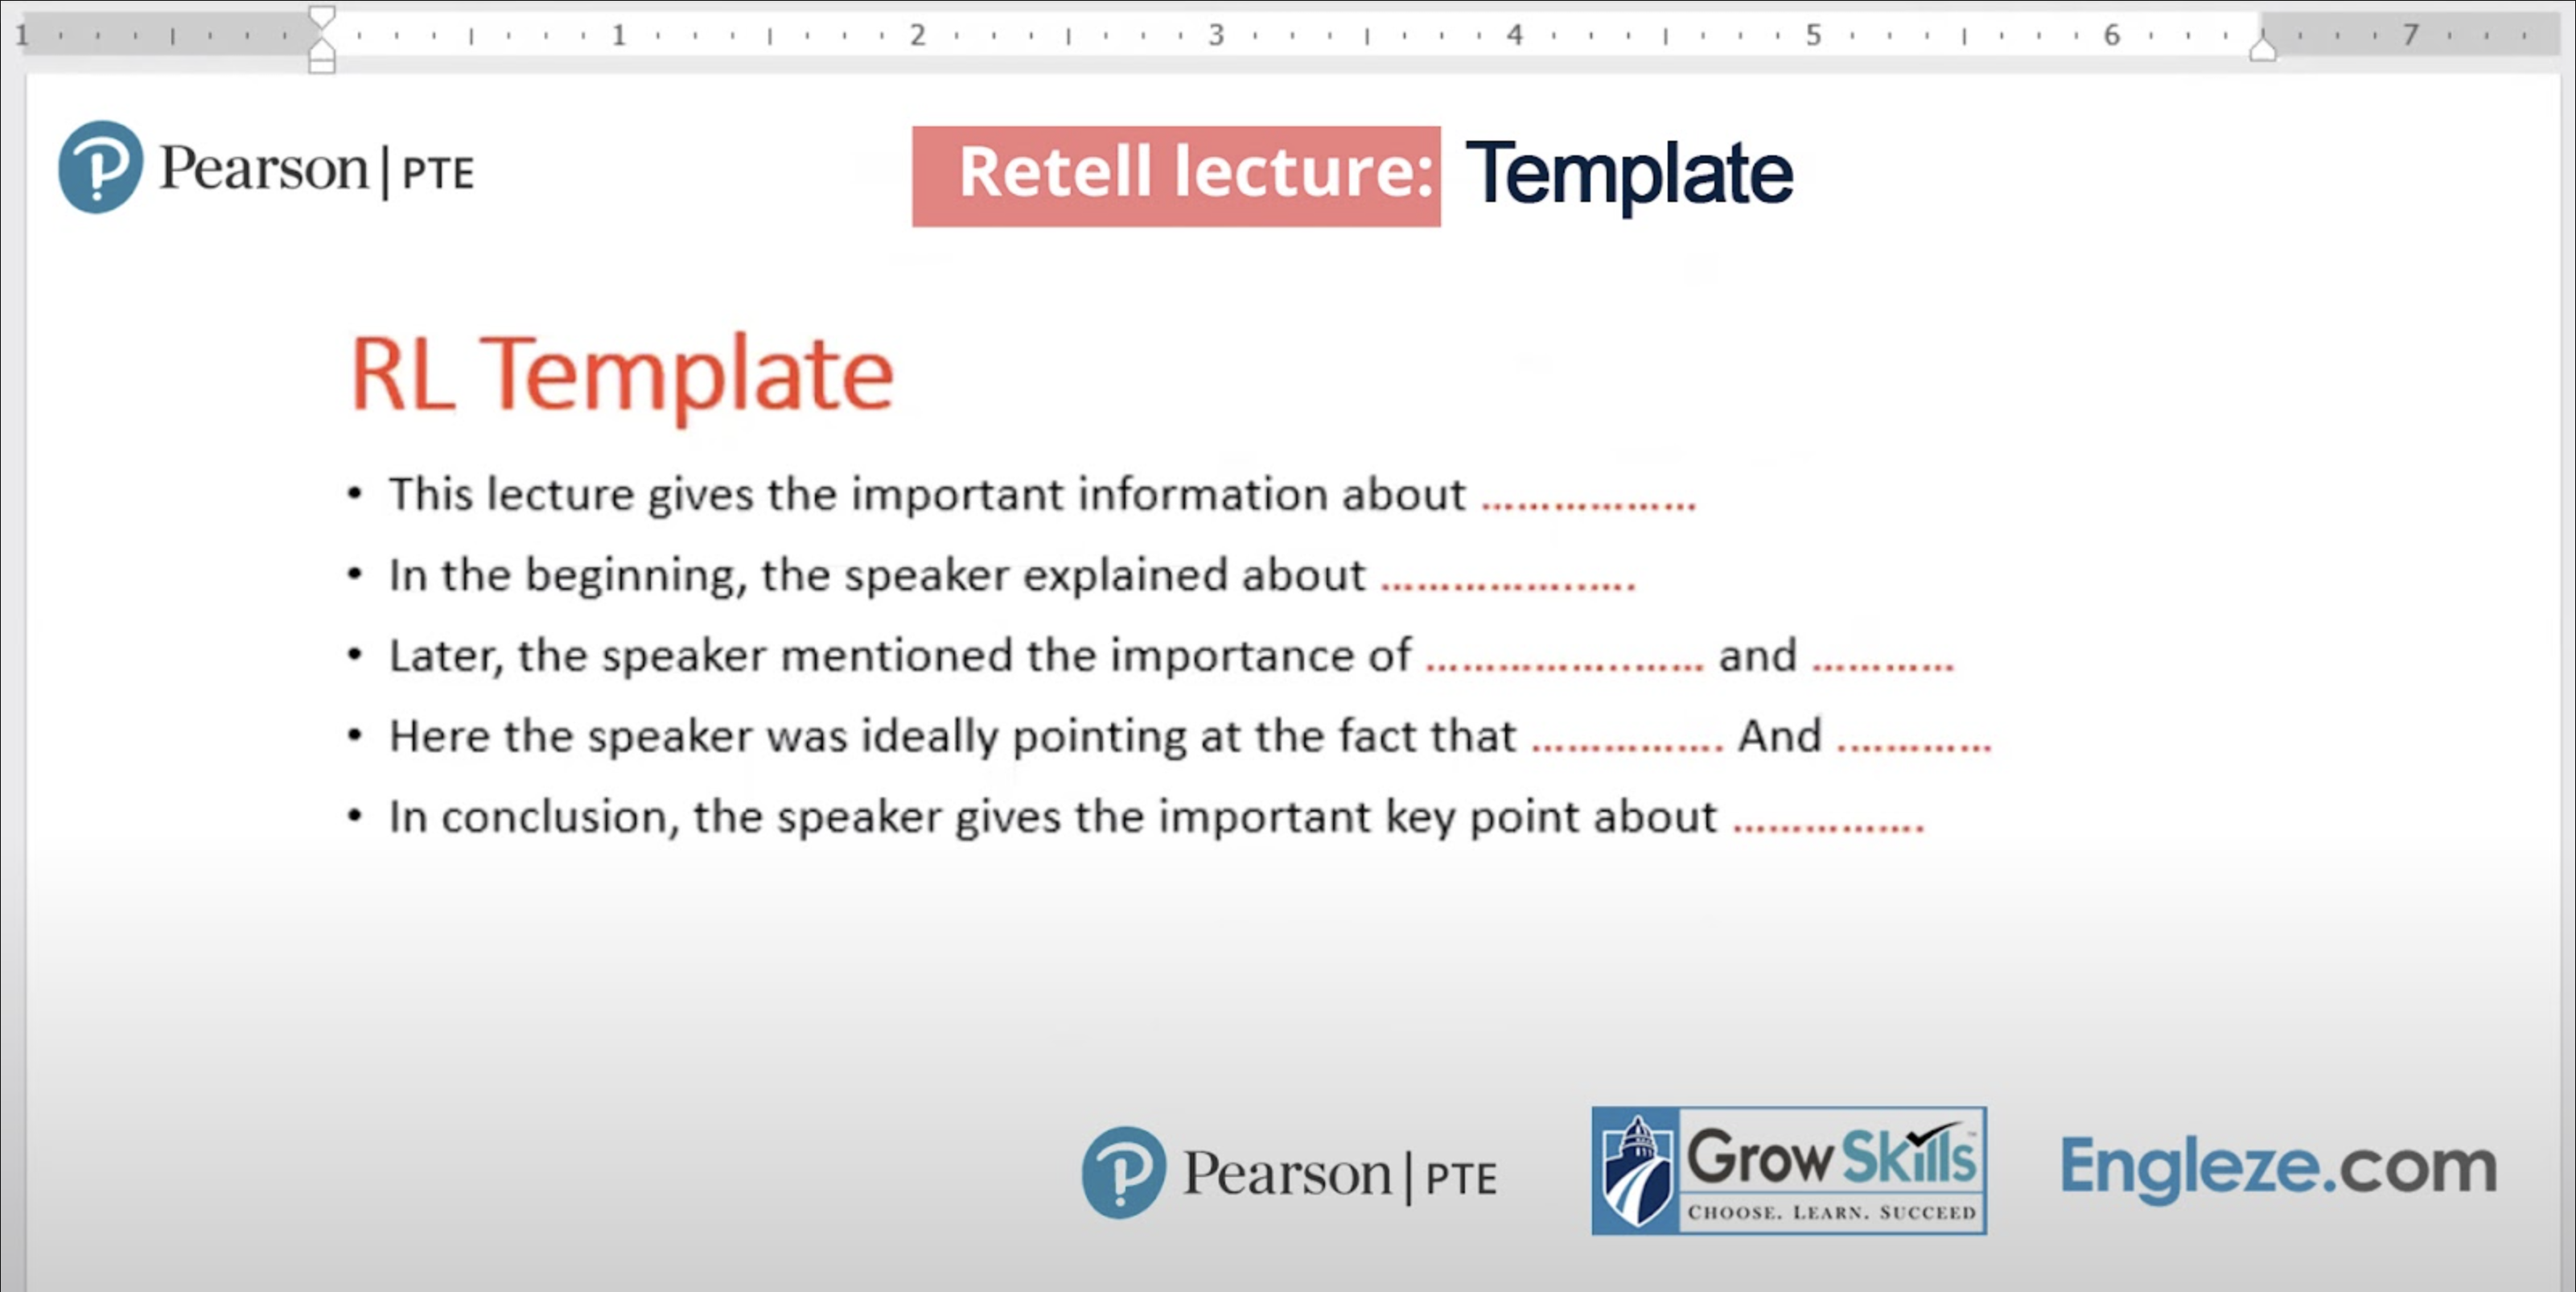 PTE Re-tell Lecture Template